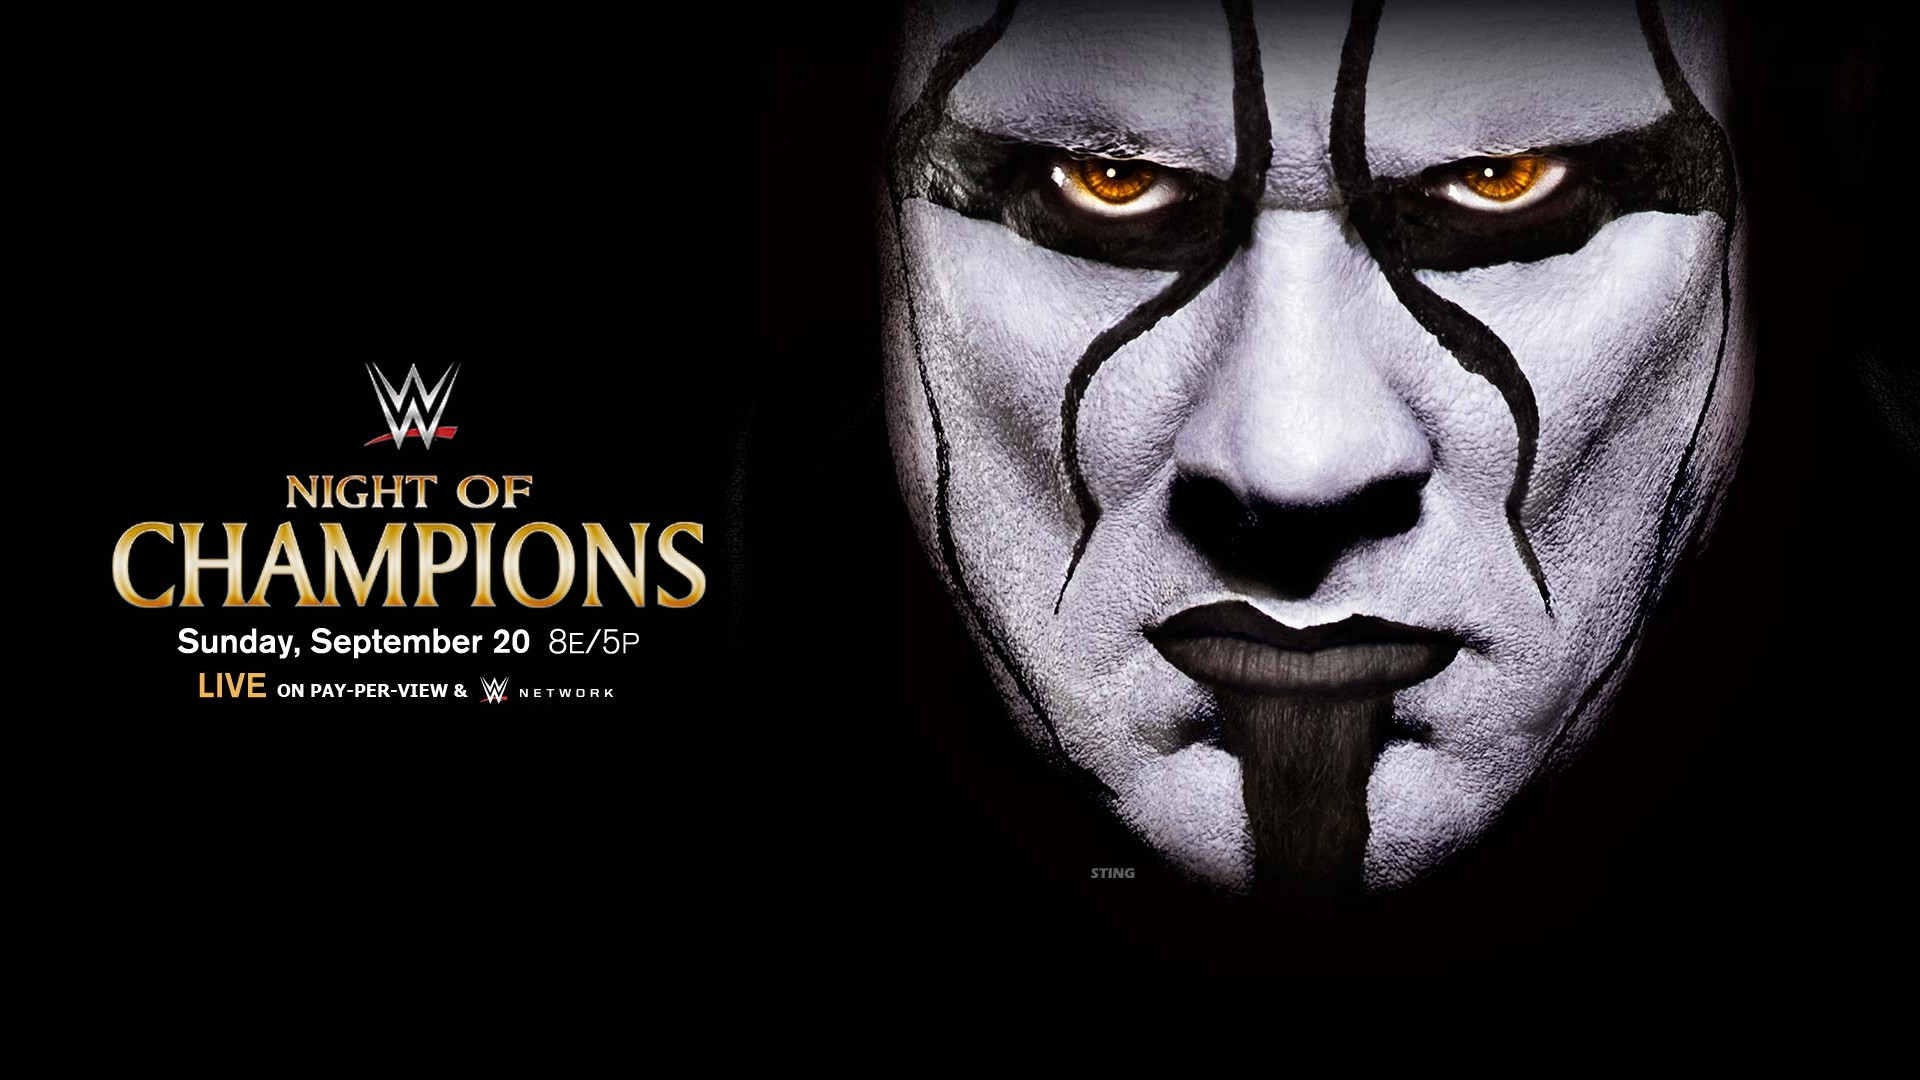 1920x1080 WWE Superstars,WWE wallpapers,WWE pictures | WWE, entertain me | Pinterest  | Wwe wallpapers and Wallpaper